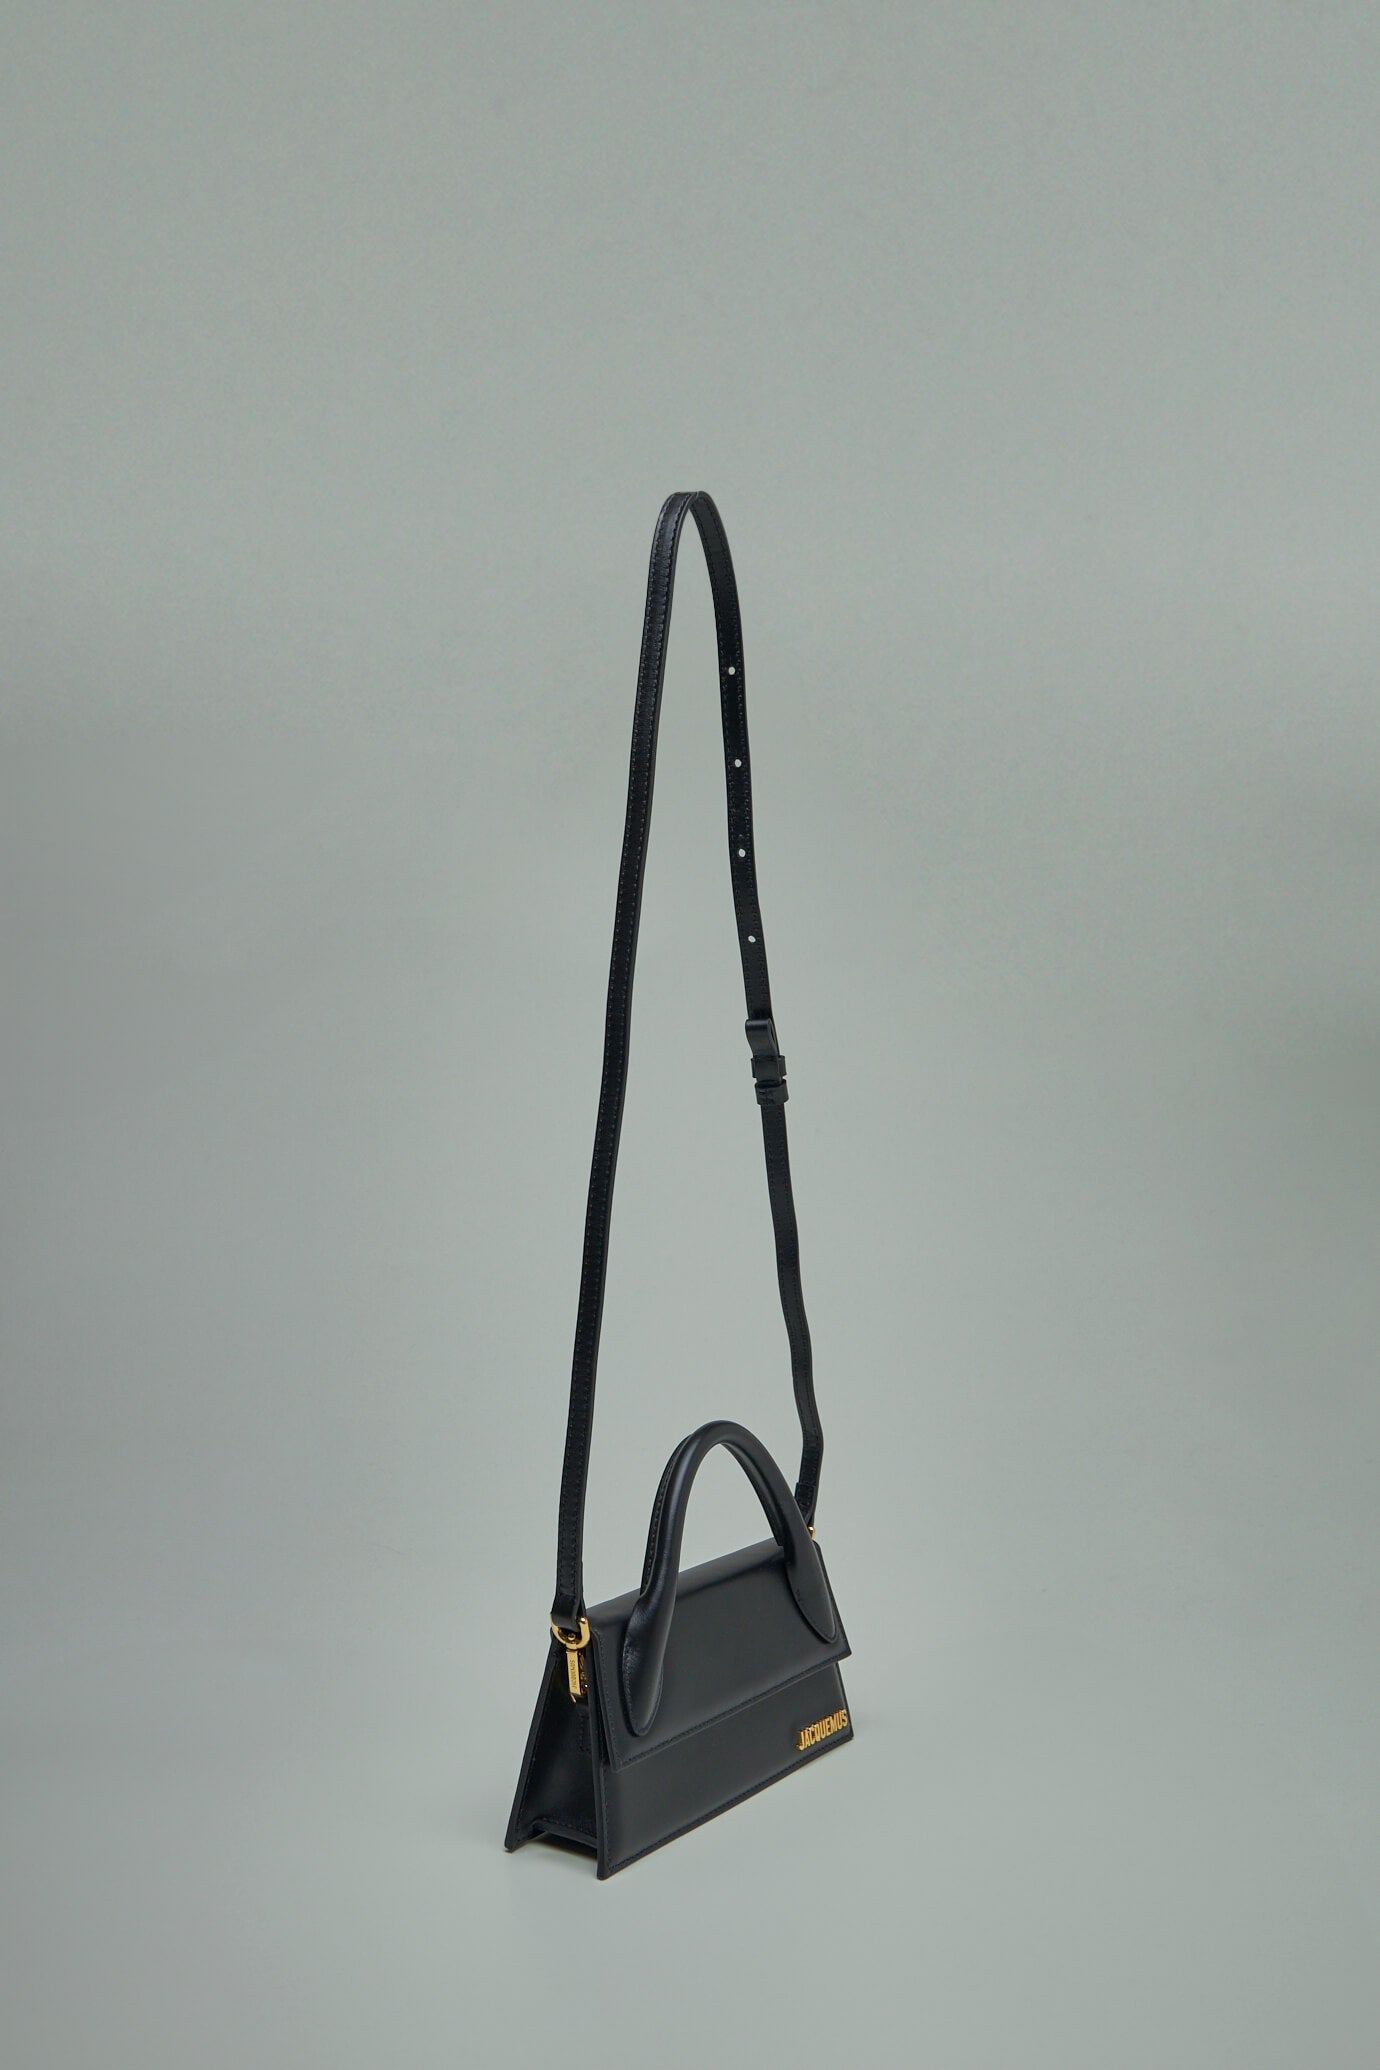 Jacquemus Le Chiquito Long Bag in Grey